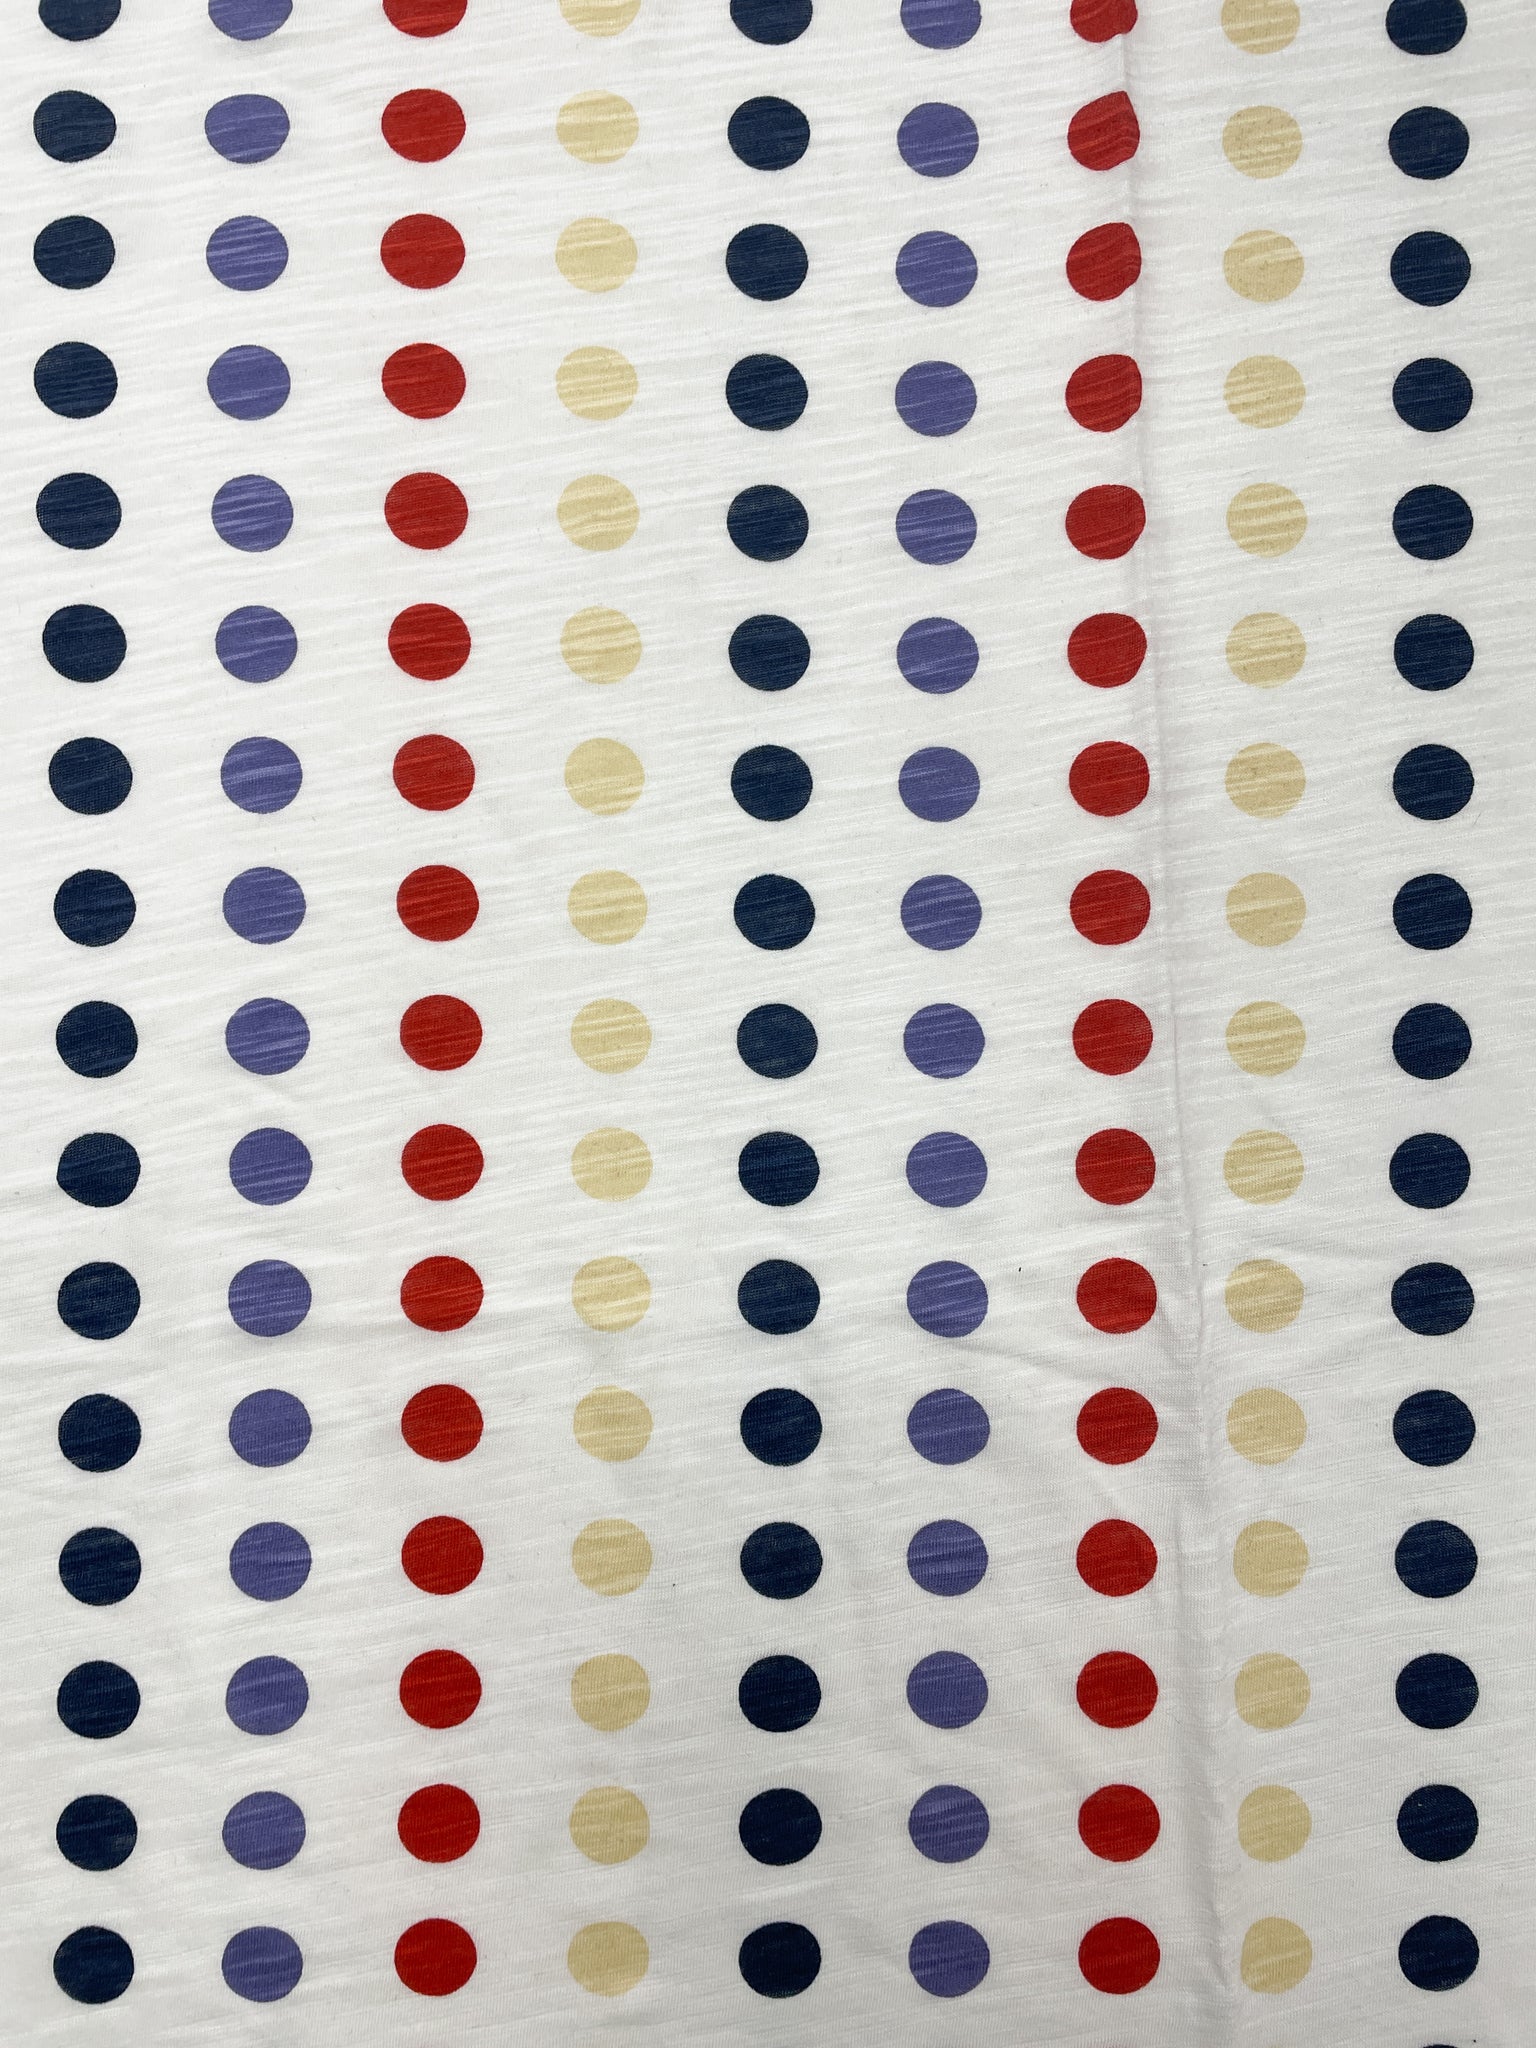 1 YD Cotton Blend Jersey Knit - White with Multi Colored Polka Dots